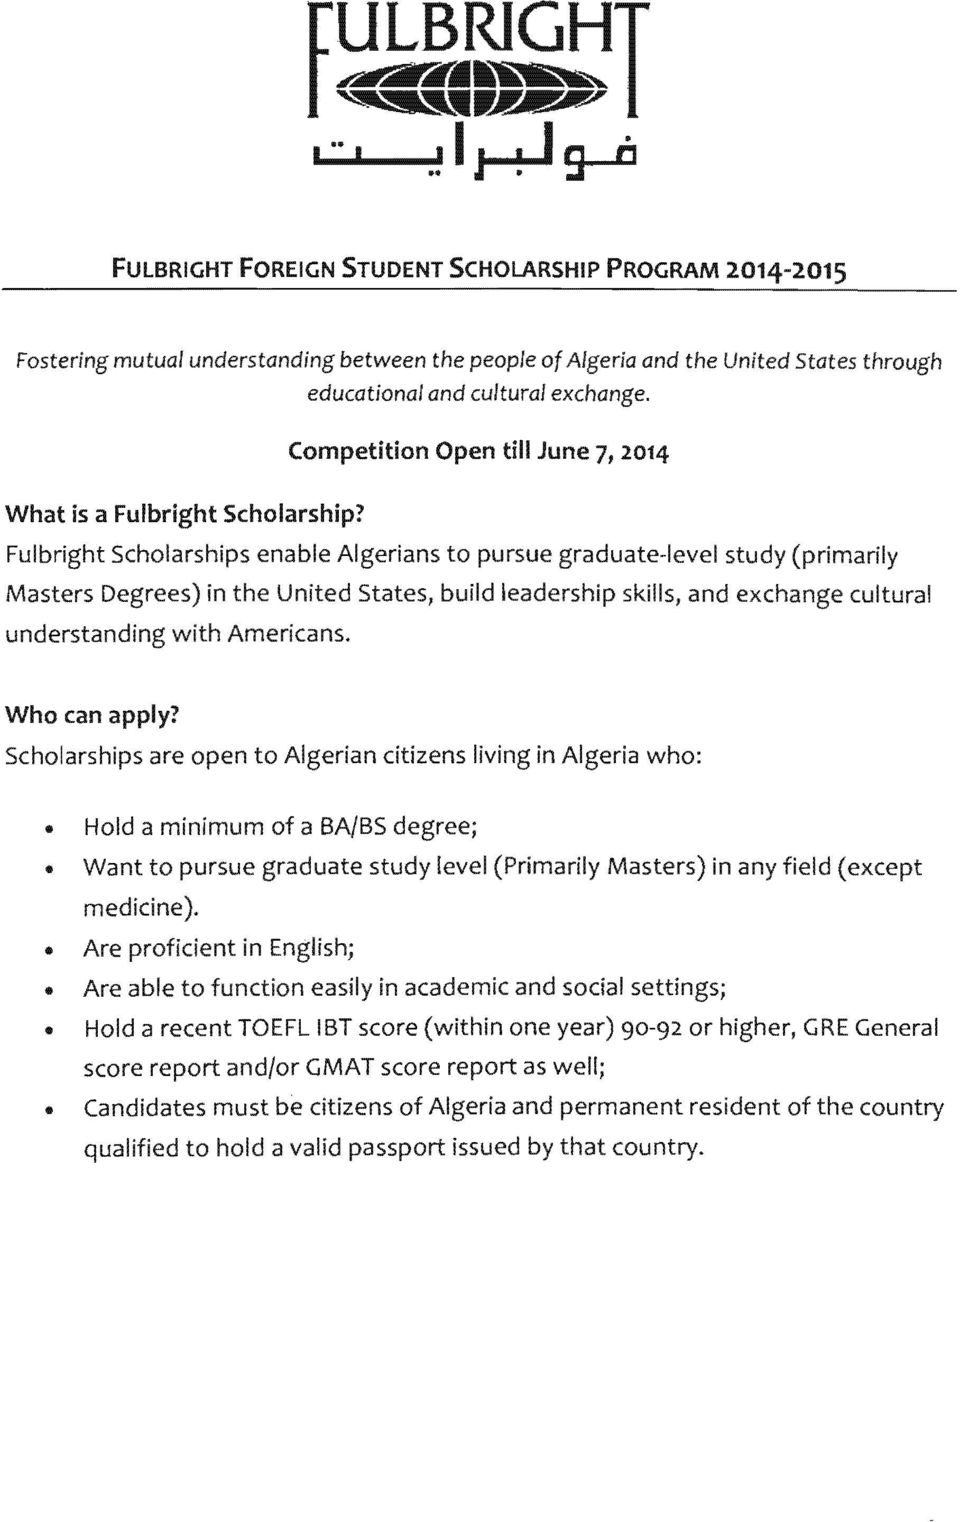 Scholarships are to Algerian citizens living in Algeria who:.. Hold a minimum a BA/BS degree;.. Want to graduate study level (Primarily Masters) in any (except medicine)... Are in English;.